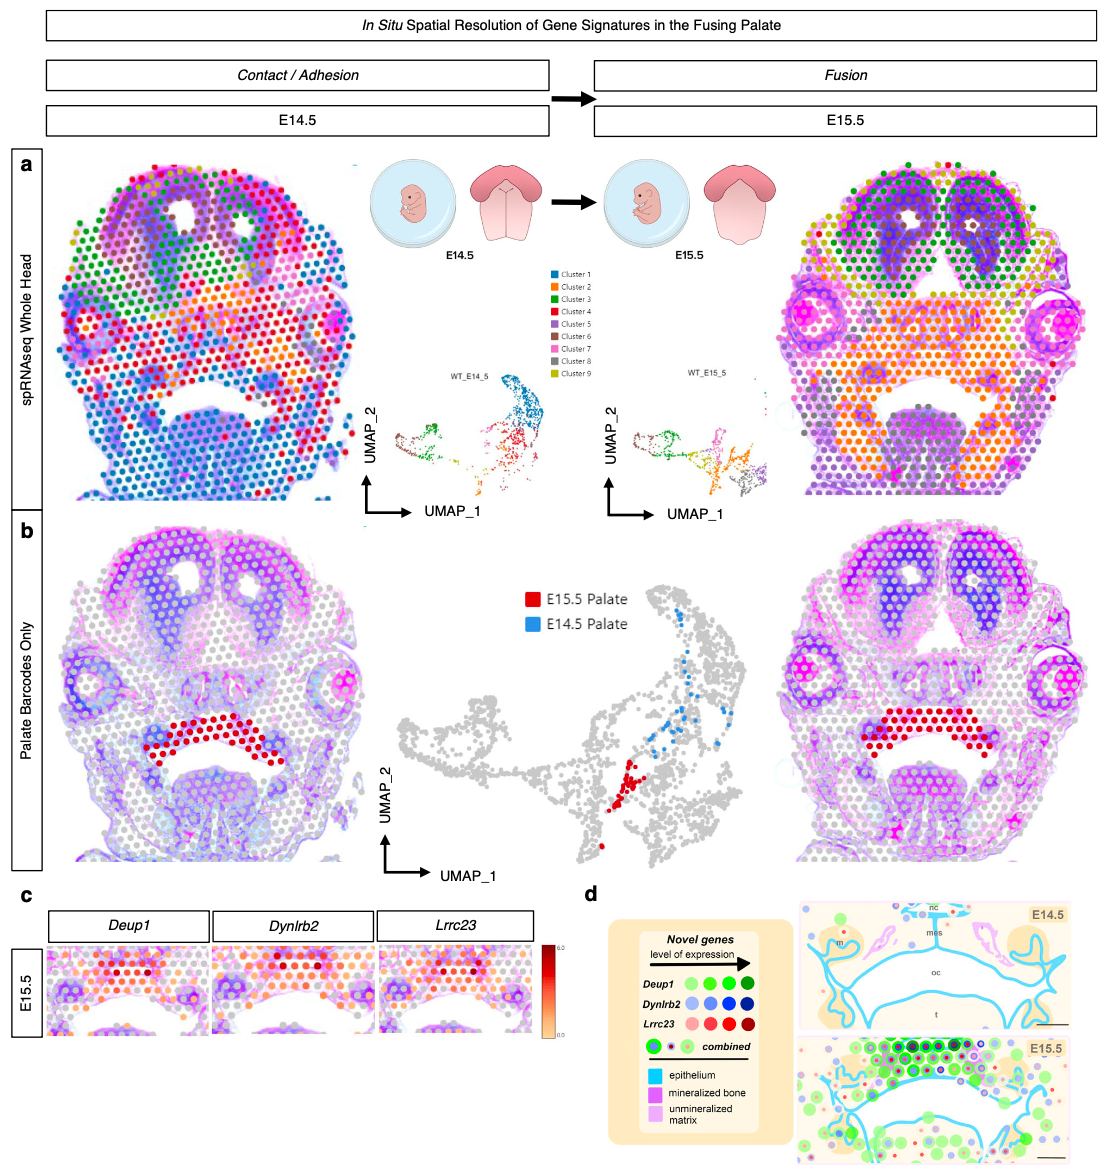 Figure 5 from Piña J, et al. (3). Mid-palatal coronal cross sections of whole embryo heads were placed on barcoded Visium slides. A) In vivo clusters were defined from the whole embryo head, demonstrating spatial relationships and morphogenetic diversity of expression, further filtered for only those clusters encoded on the barcodes placed within the palate tissue in each respective section to identify top differentially expressed genes (DEGs) B) from E14.5 vs. E15.5 in the palate. C) Spatial gene expression feature plots for the three enriched genes identified. D) Colored circles correspond to 55 μm-diameter Visium transcriptomic resolution. Increased expression levels, delineated using the 10x Genomics Loupe Browser, are represented here with darker shades of green (Deup1), blue (Dynlrb2), or red (Lrrc23). The combined localization of these genes is indicated by overlapping concentric colored circles, the diameter of which does not correspond to degree of expression. nc nasal cavity, oc oral cavity, t tongue, mes midline epithelial seam; scale bar: 200 μm. CREDIT: Piña J, et al. (3). (CC BY 4.0)